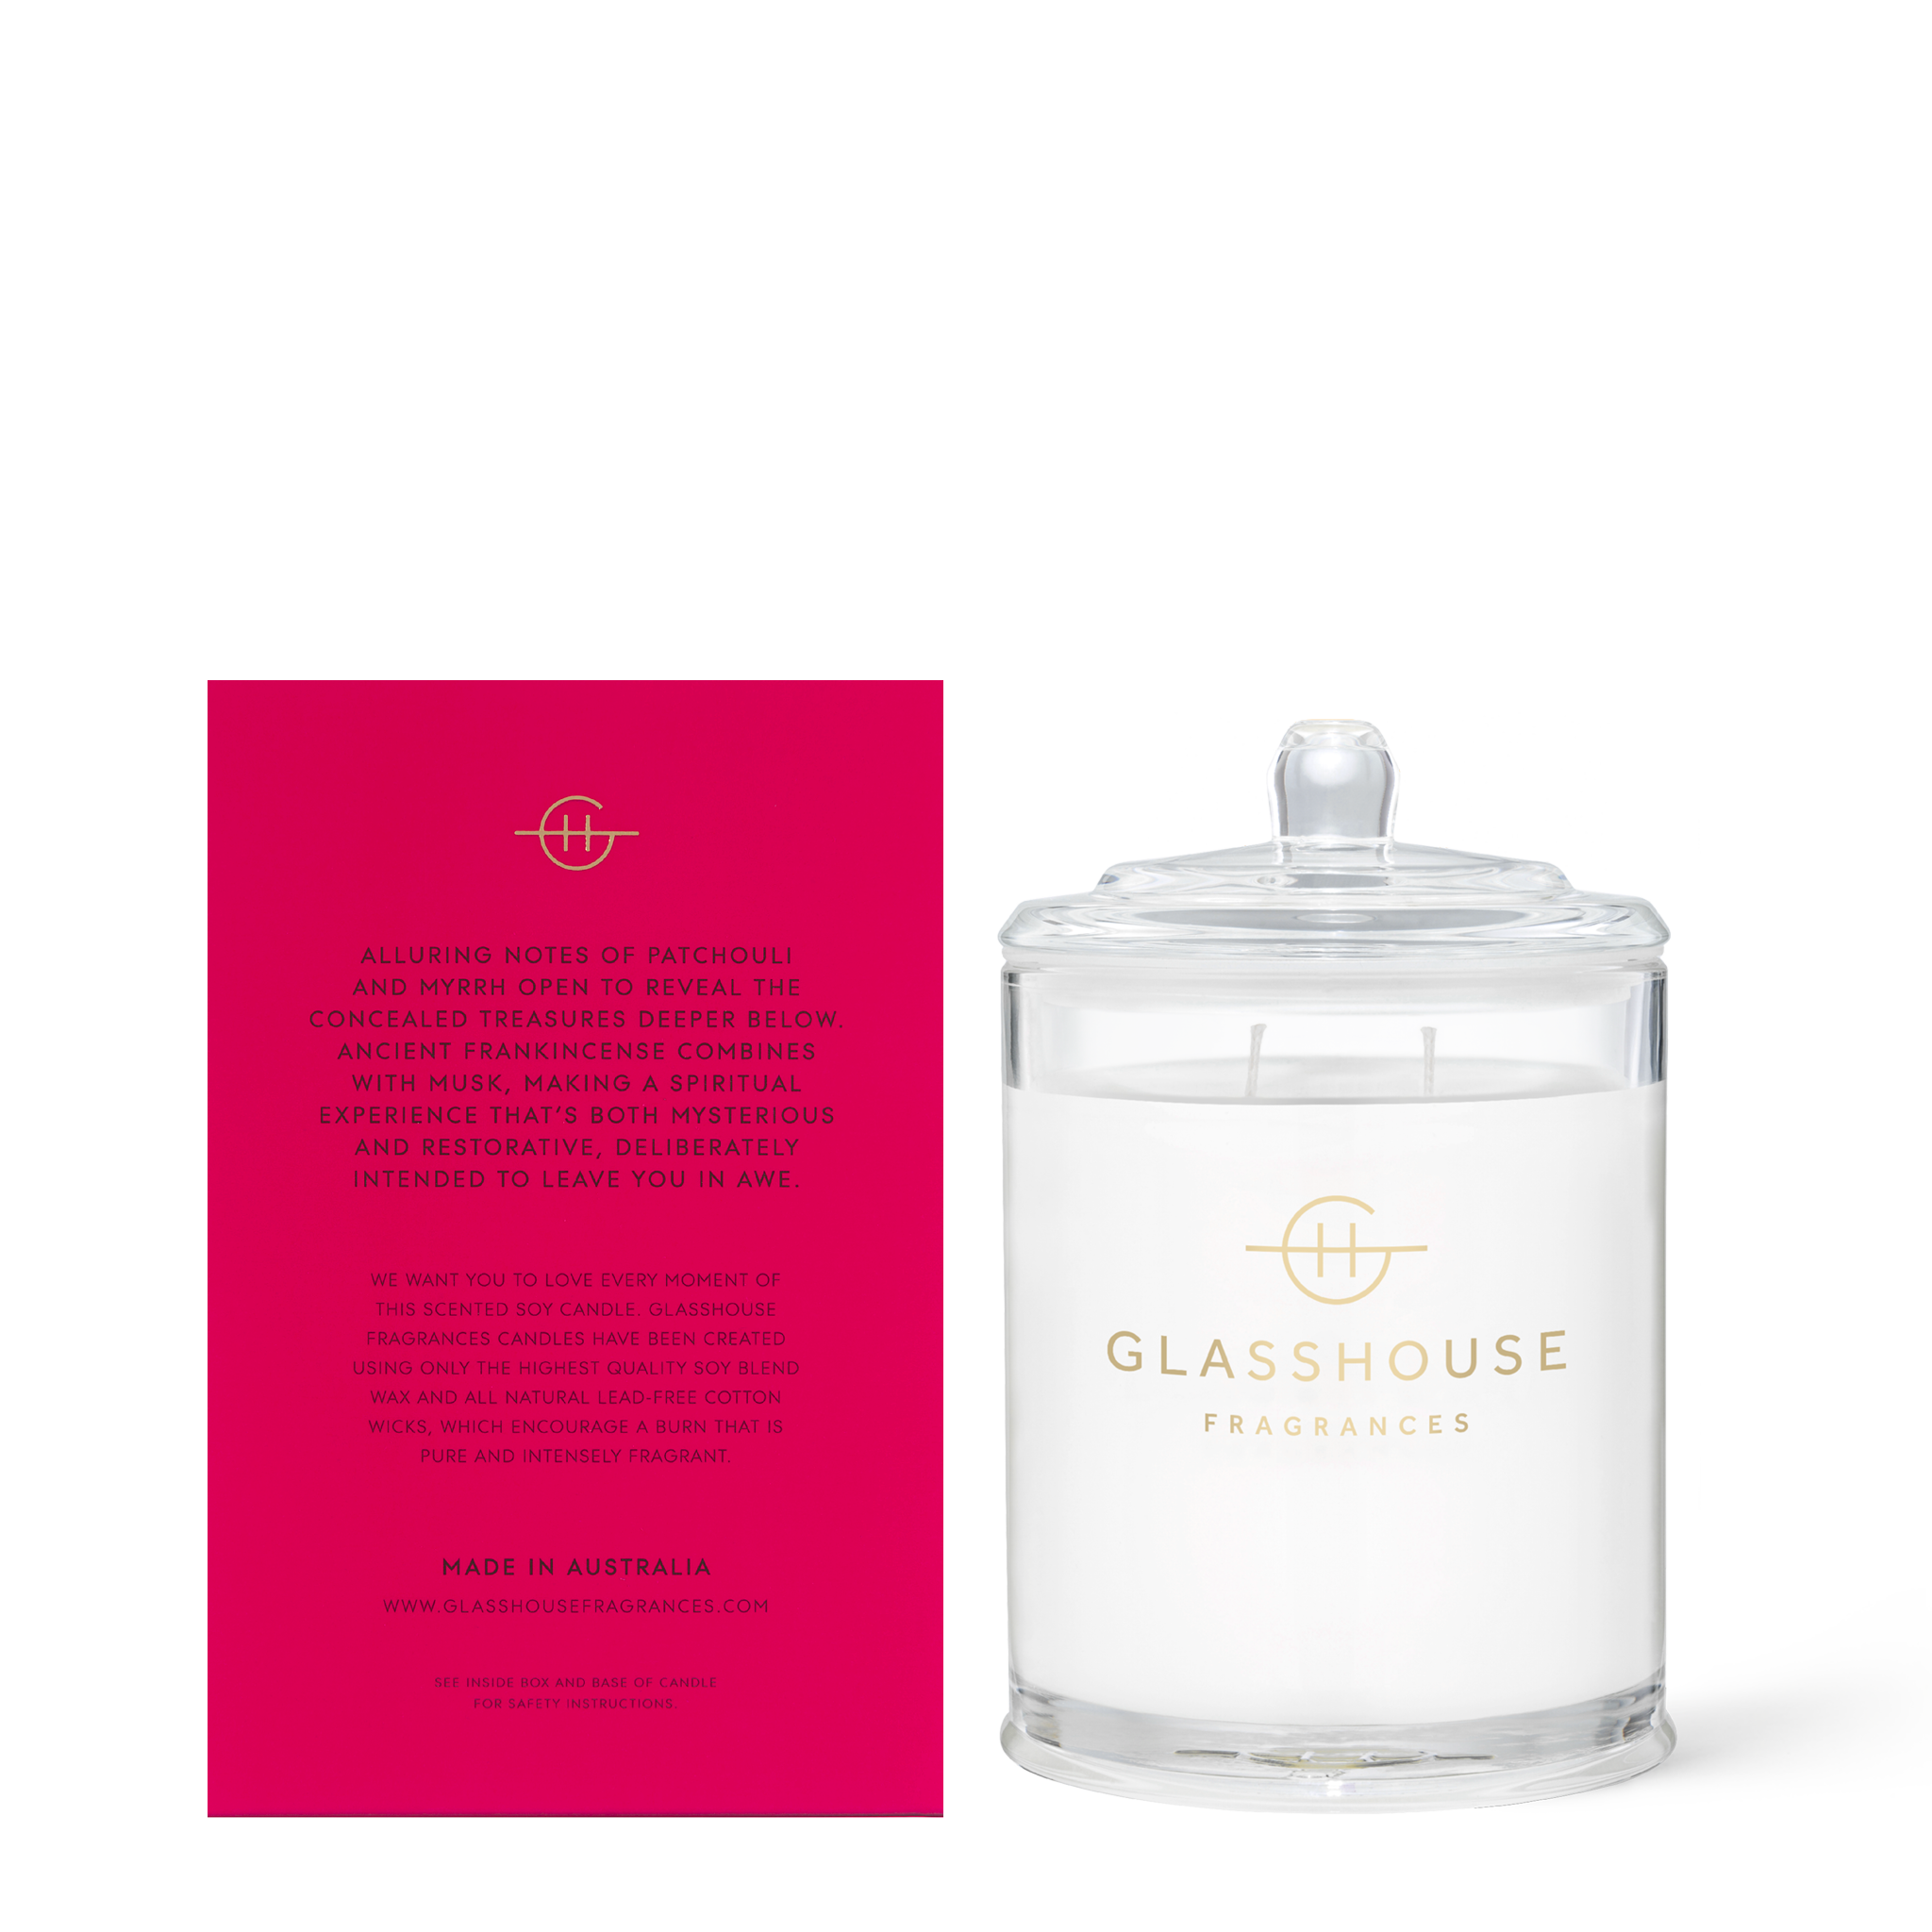 Glasshouse Fragrances Secrets of the Sistine Frankincense and Myrrh 380g Soy Candle with box - back of product shot